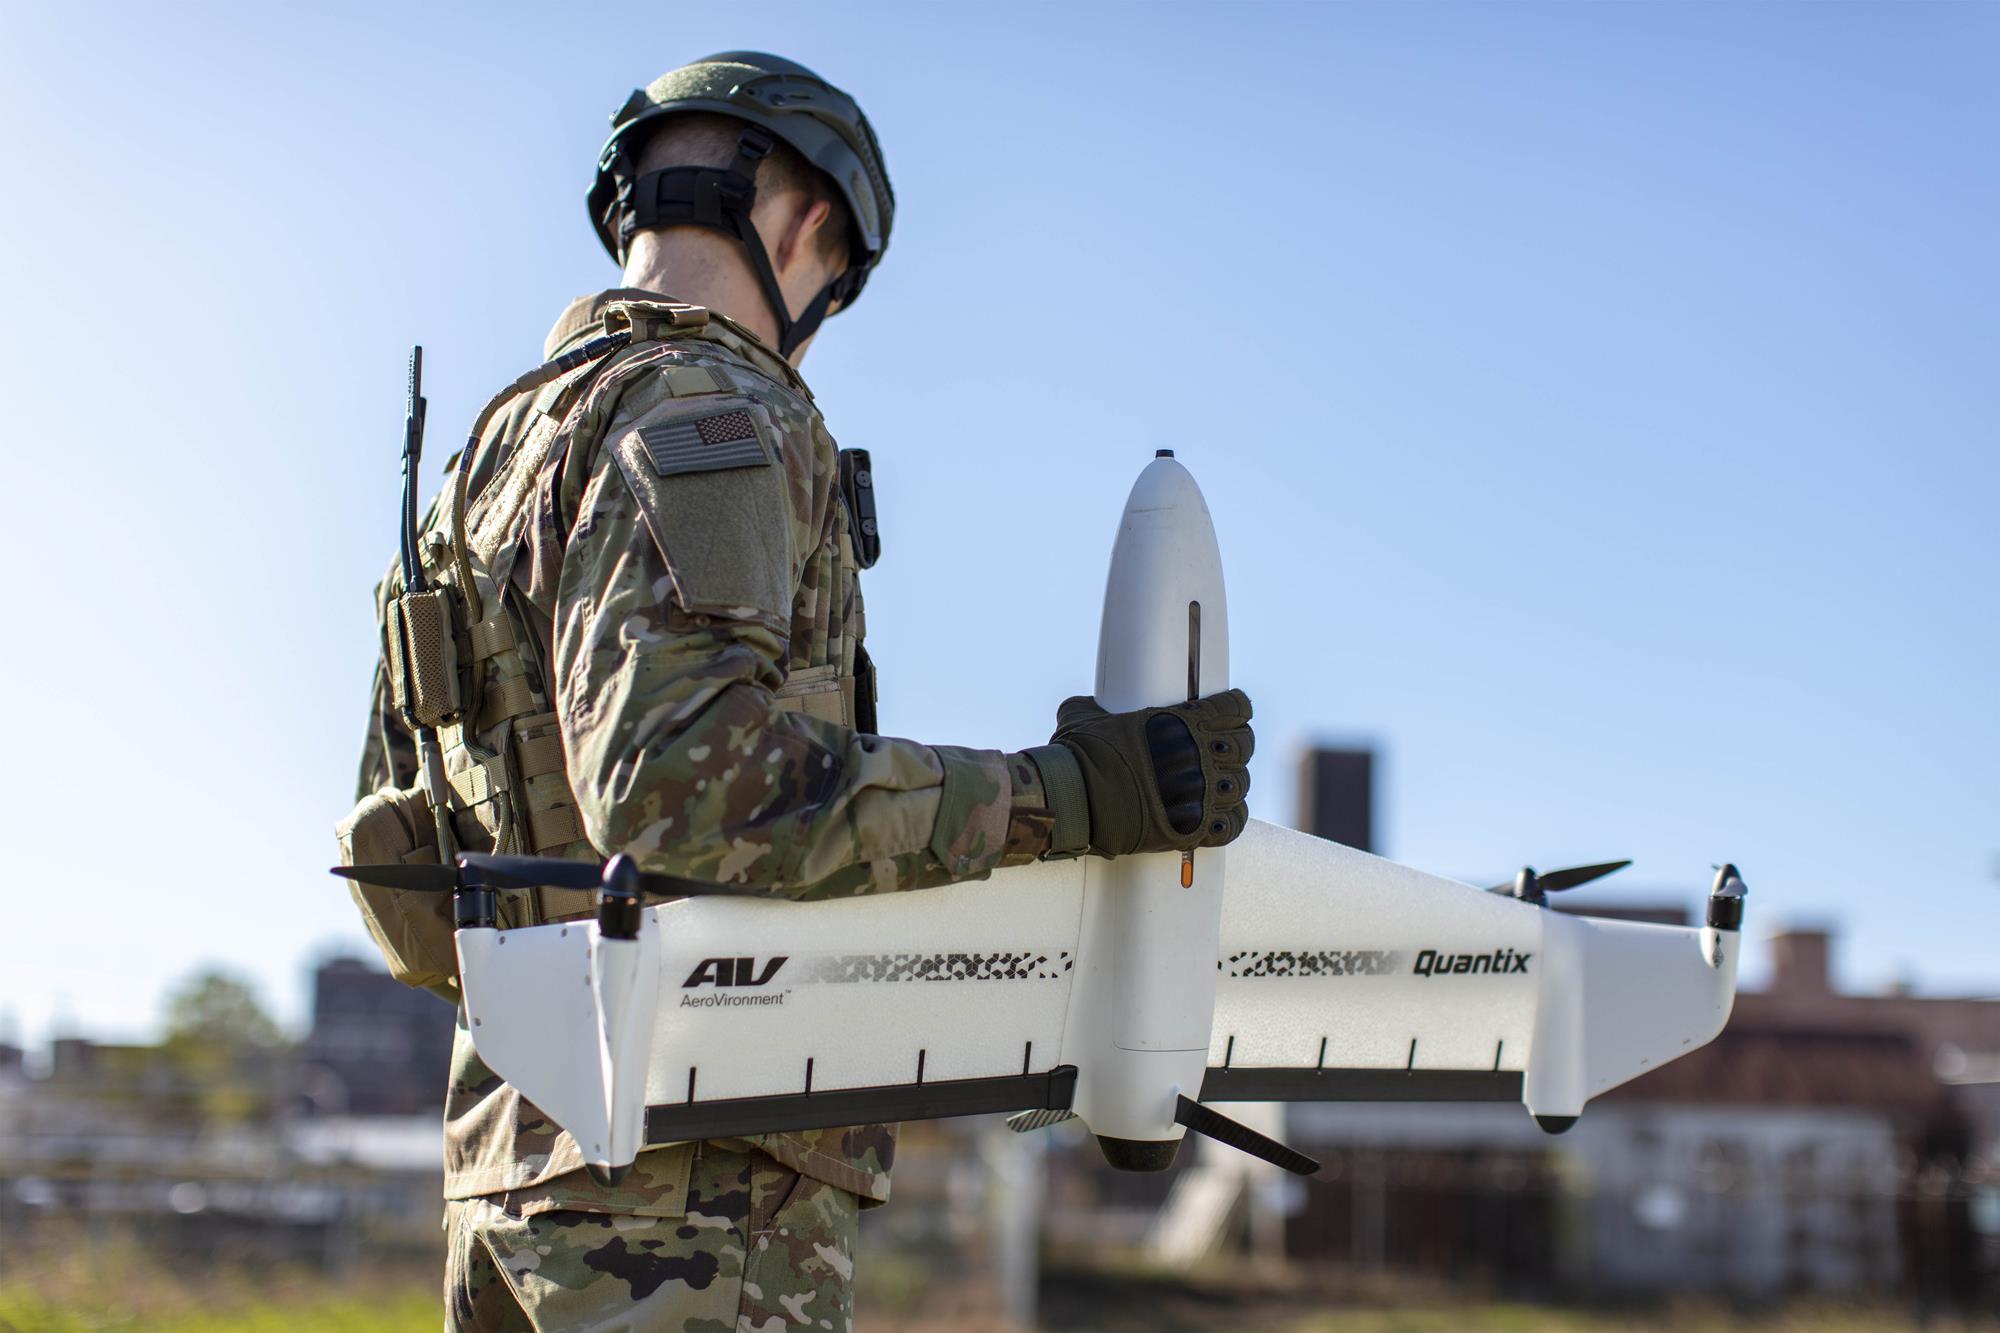 Lang Duplikering Billy AeroVironment launches Quantix Recon, a military variant of its farm  surveying drone | News | Flight Global